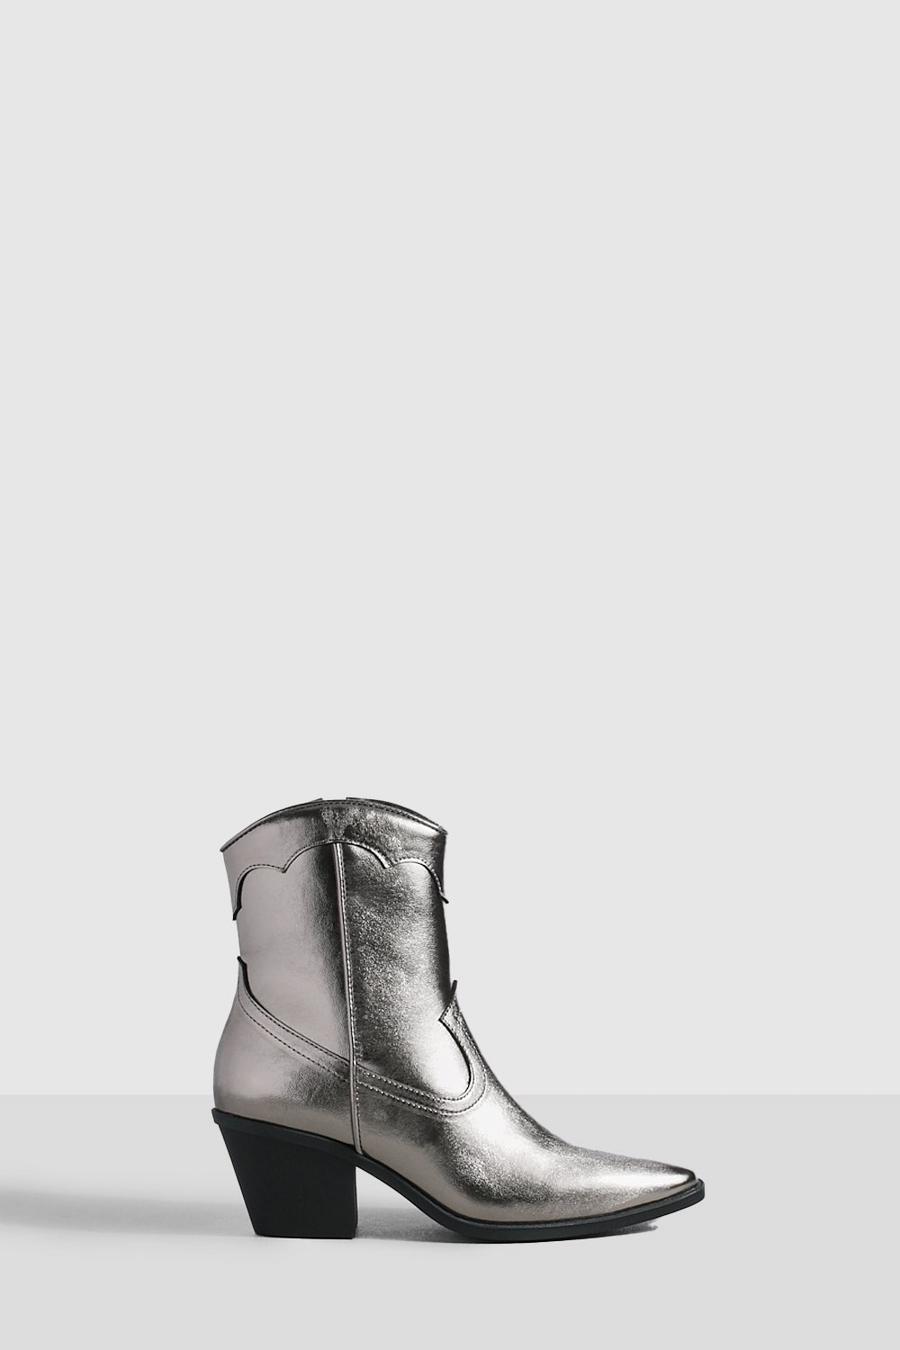 Pewter Metallic Cowboy Western Ankle Boots